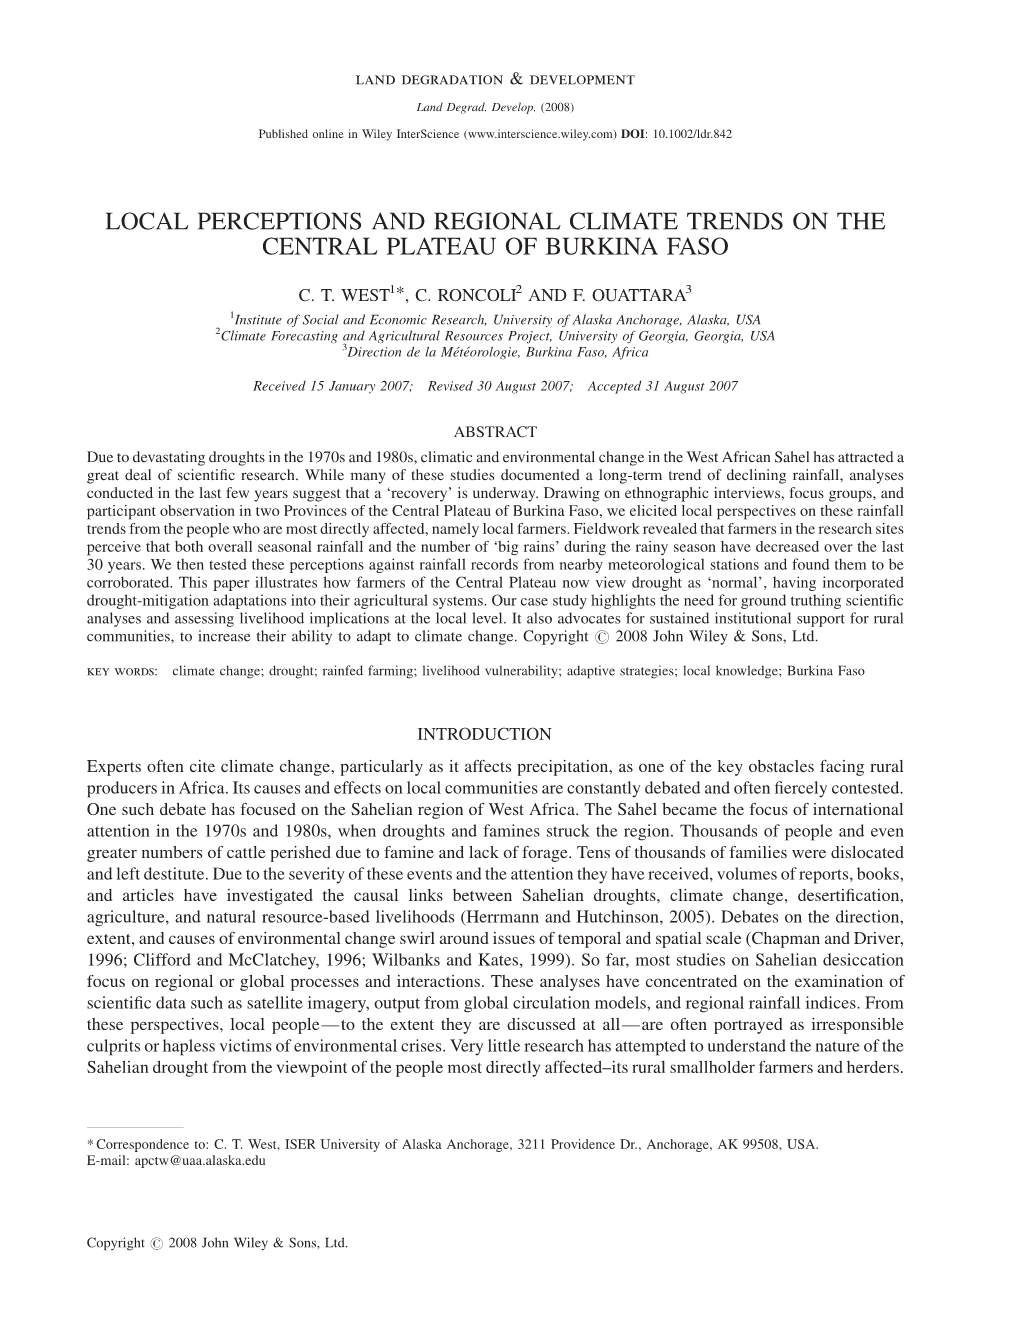 Local Perceptions and Regional Climate Trends on the Central Plateau of Burkina Faso